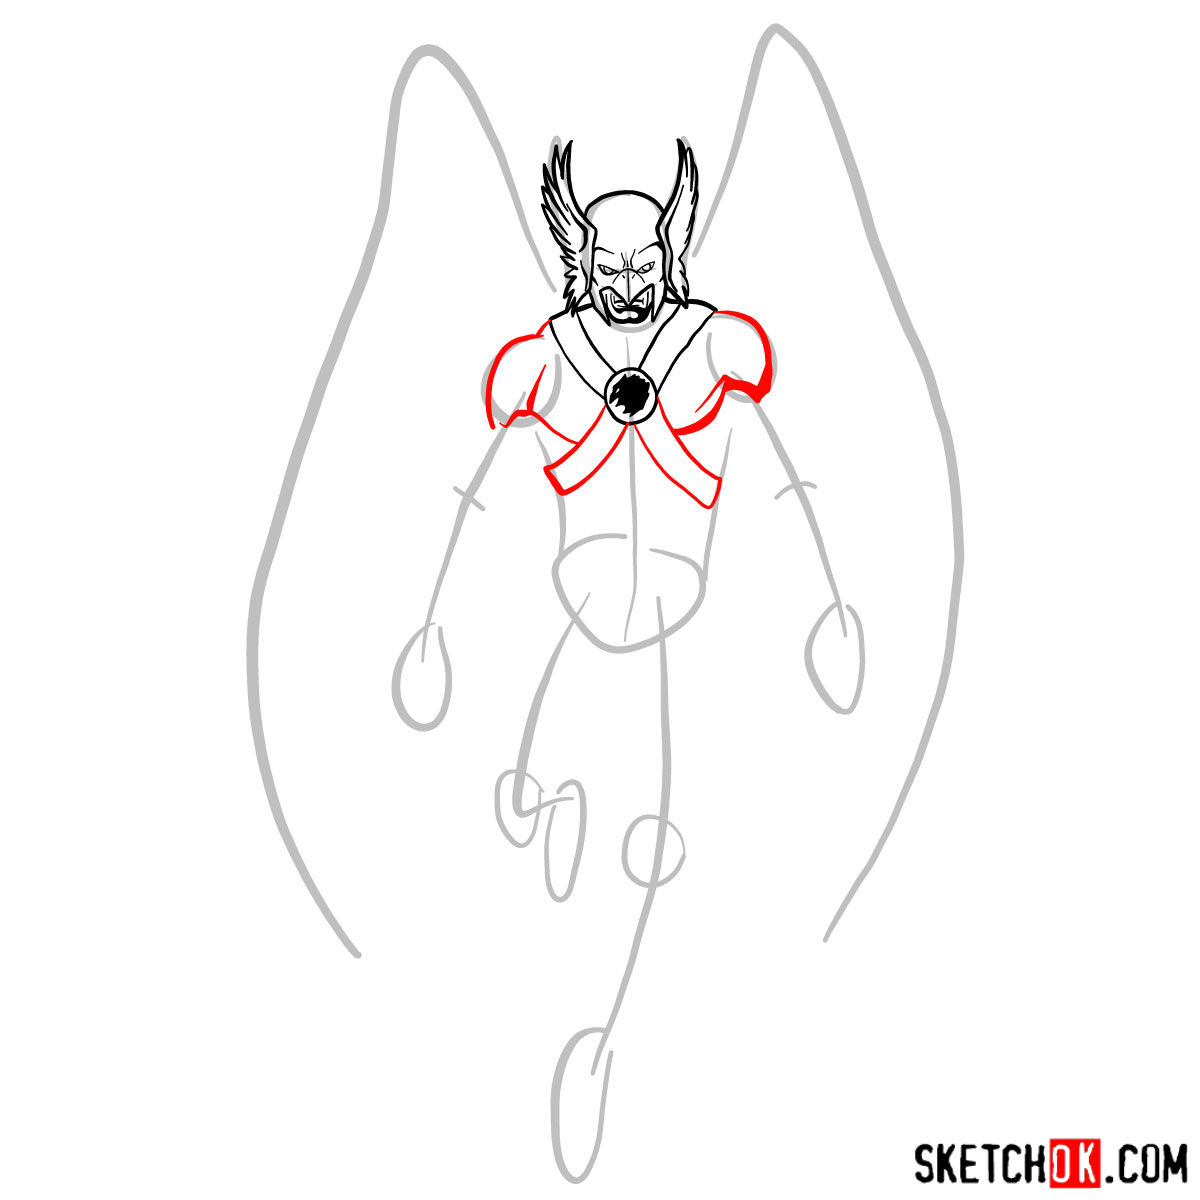 How to draw Hawkman from DC Comics - step 06